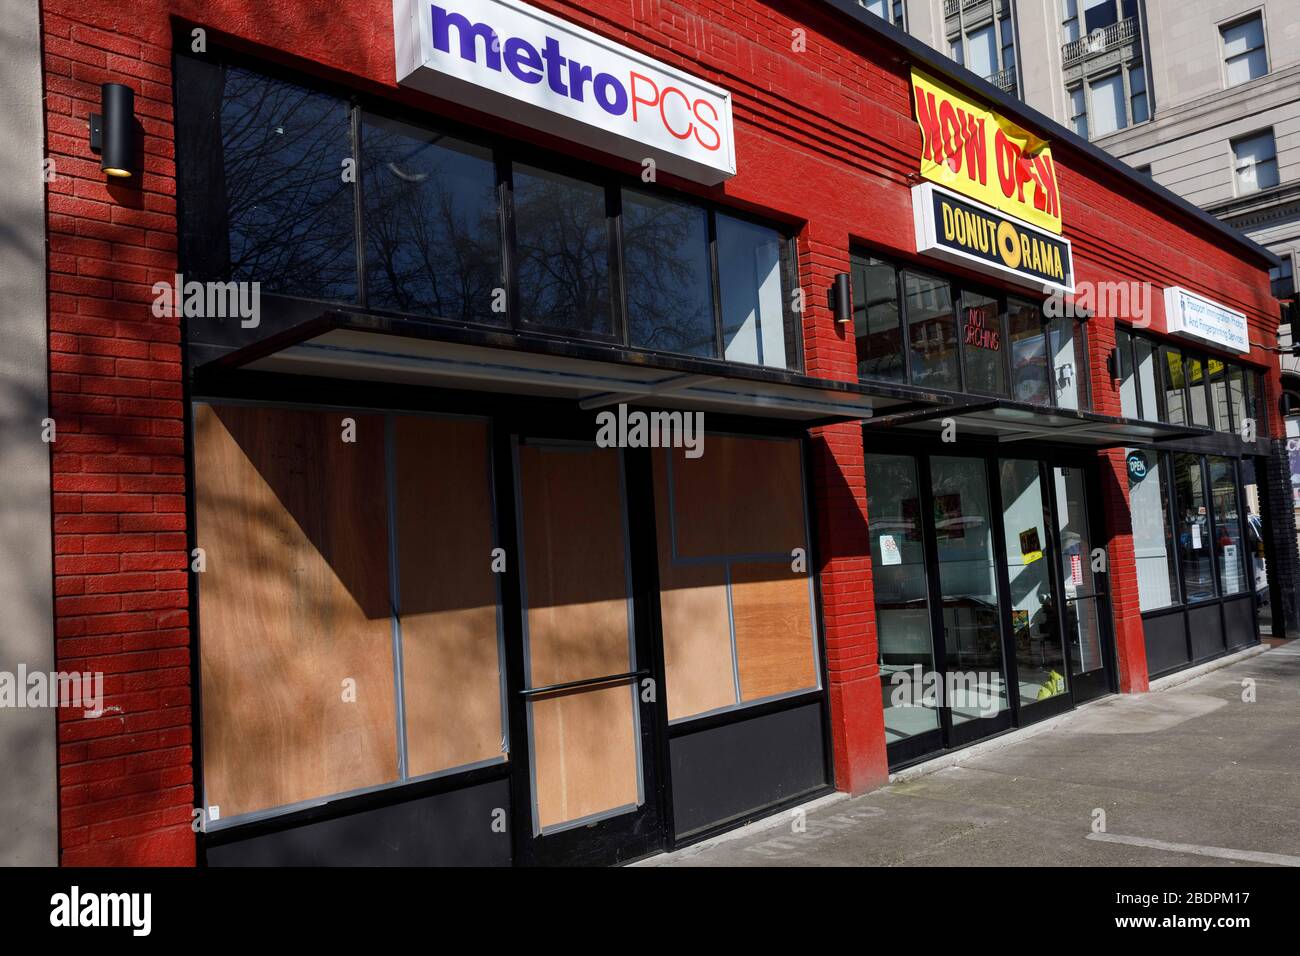 Portland, USA. 08th Apr, 2020. Boarded-up stores, services, and restaurants become more visible in Portland, Oregon on April 8, 2020, as the economic consequences of the Covid-19 pandemic spread. Pain spreads across all economic levels, from high-end gentrified stores to mom-and-pop restaurants and service industries. (Photo by John Rudoff/Sipa USA) Credit: Sipa USA/Alamy Live News Stock Photo